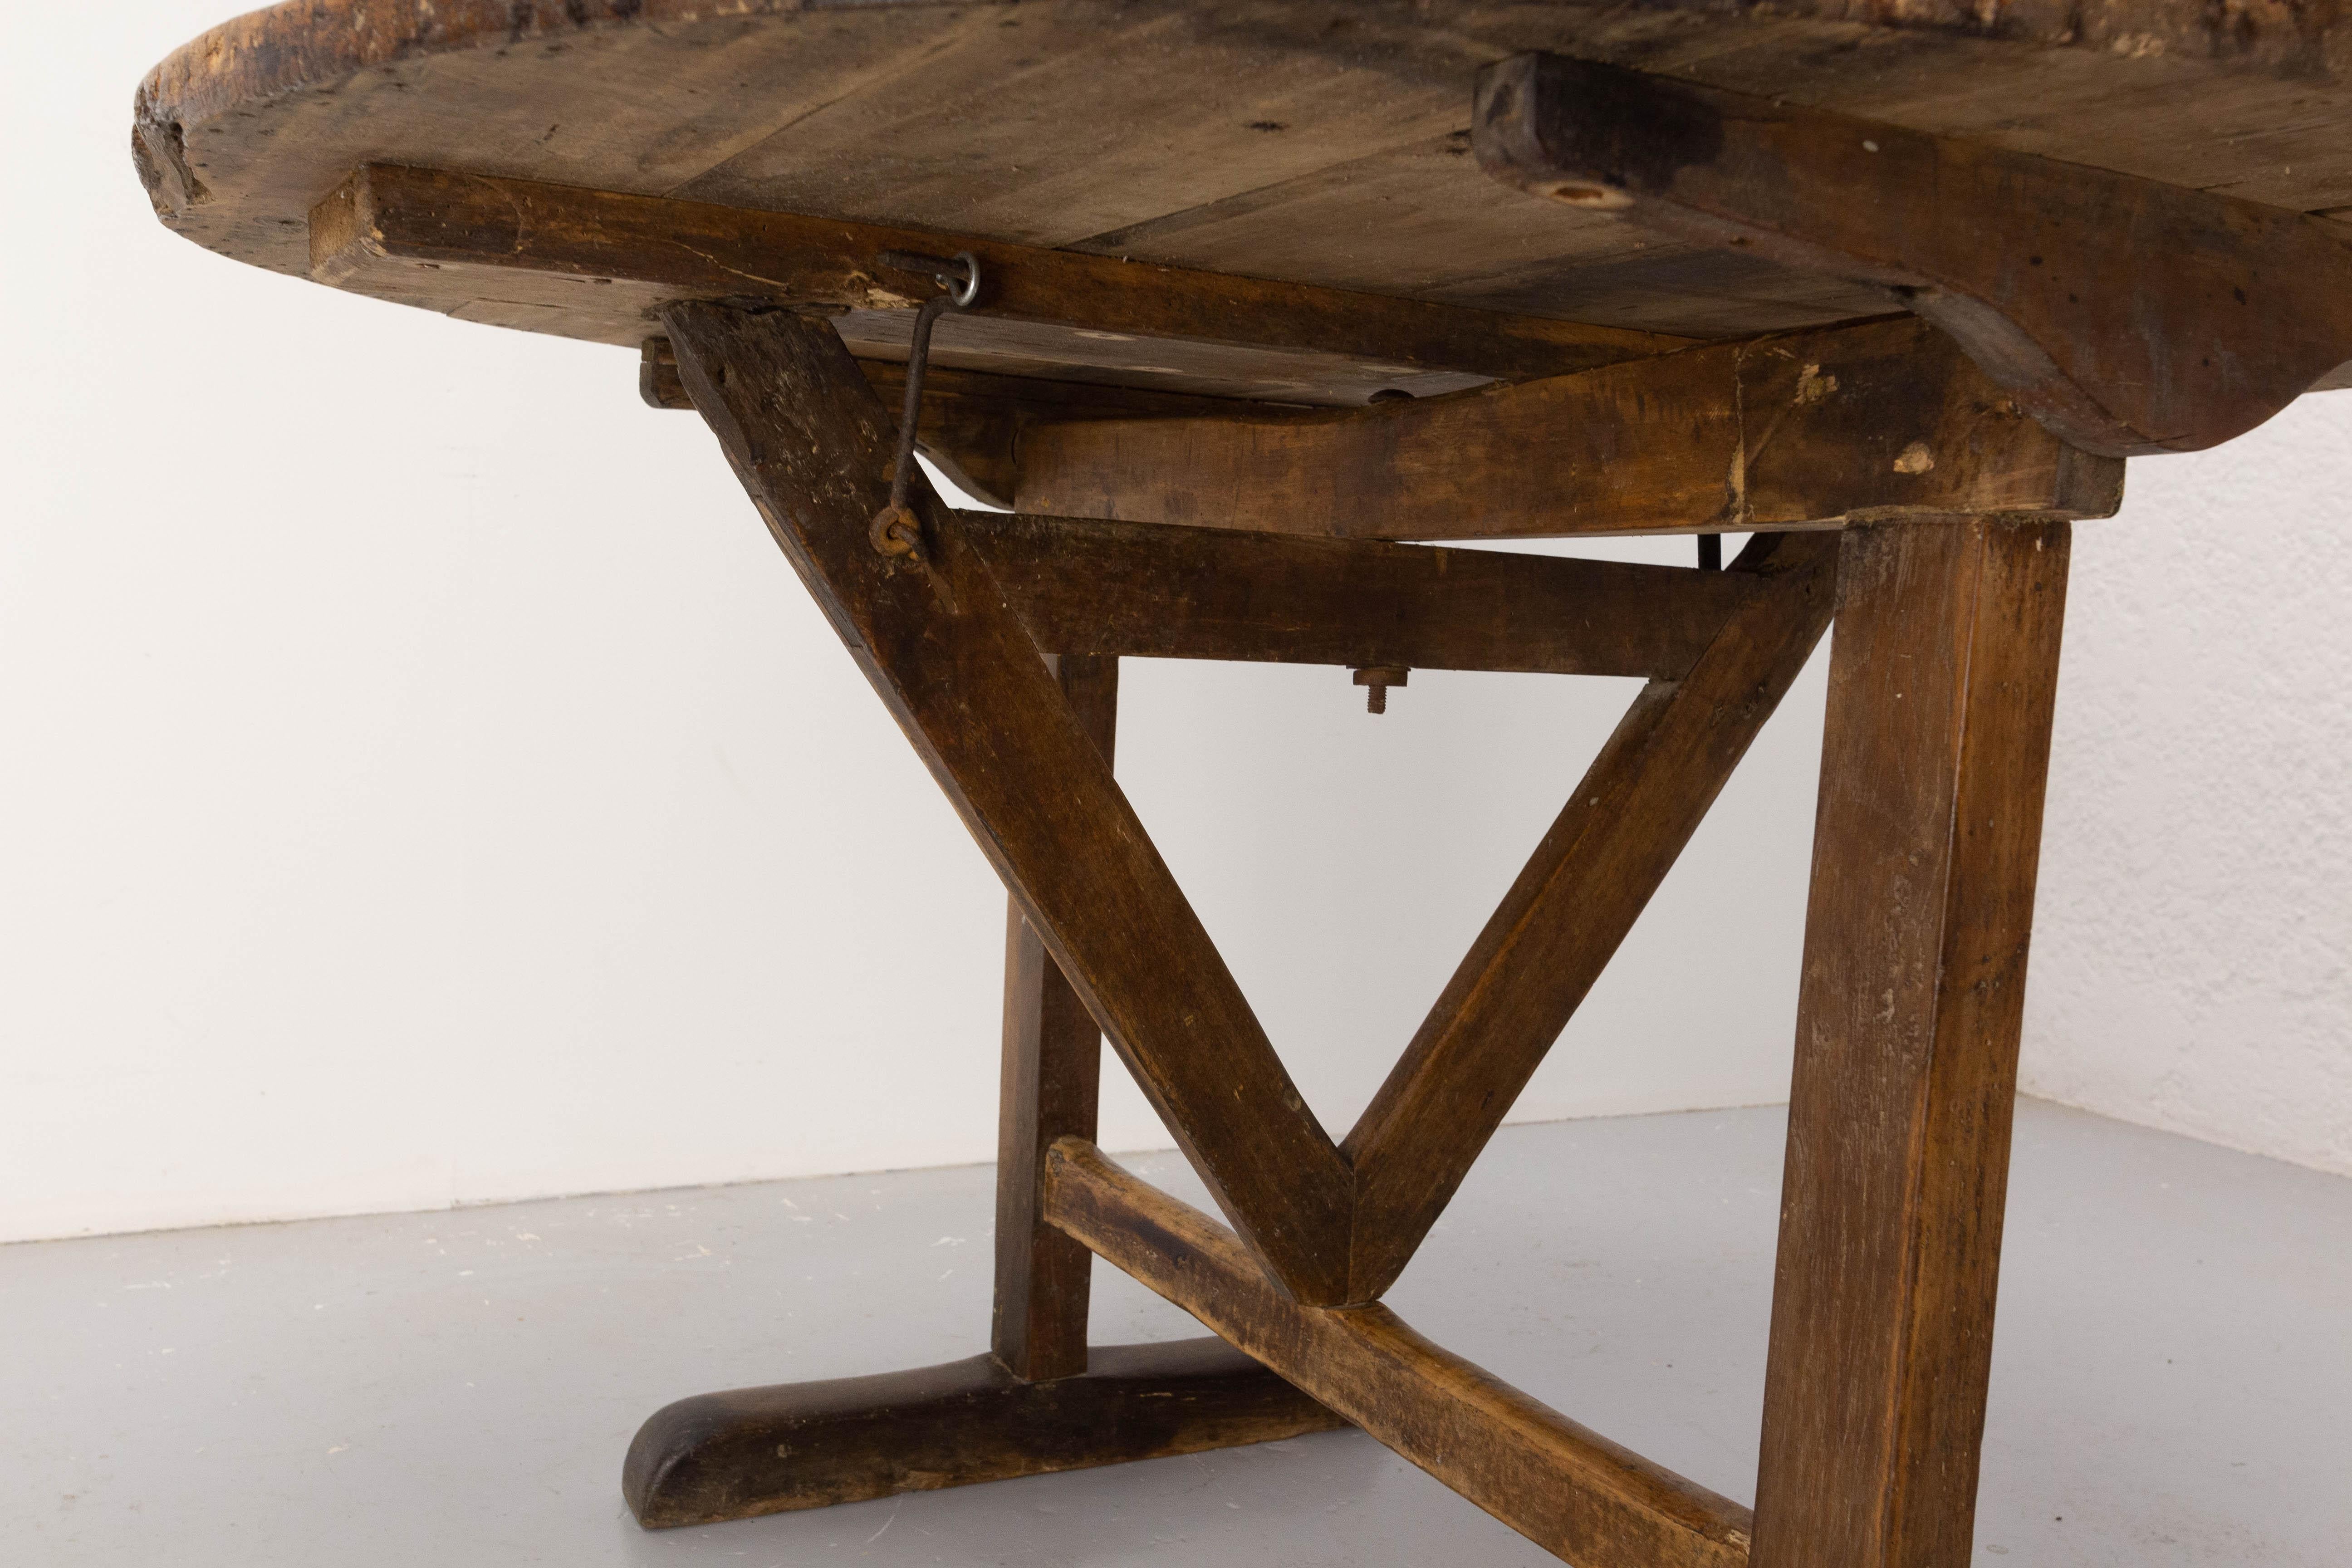 French Foldable Oak & Poplar Table Called Winemaker's Table, 19th Century For Sale 5